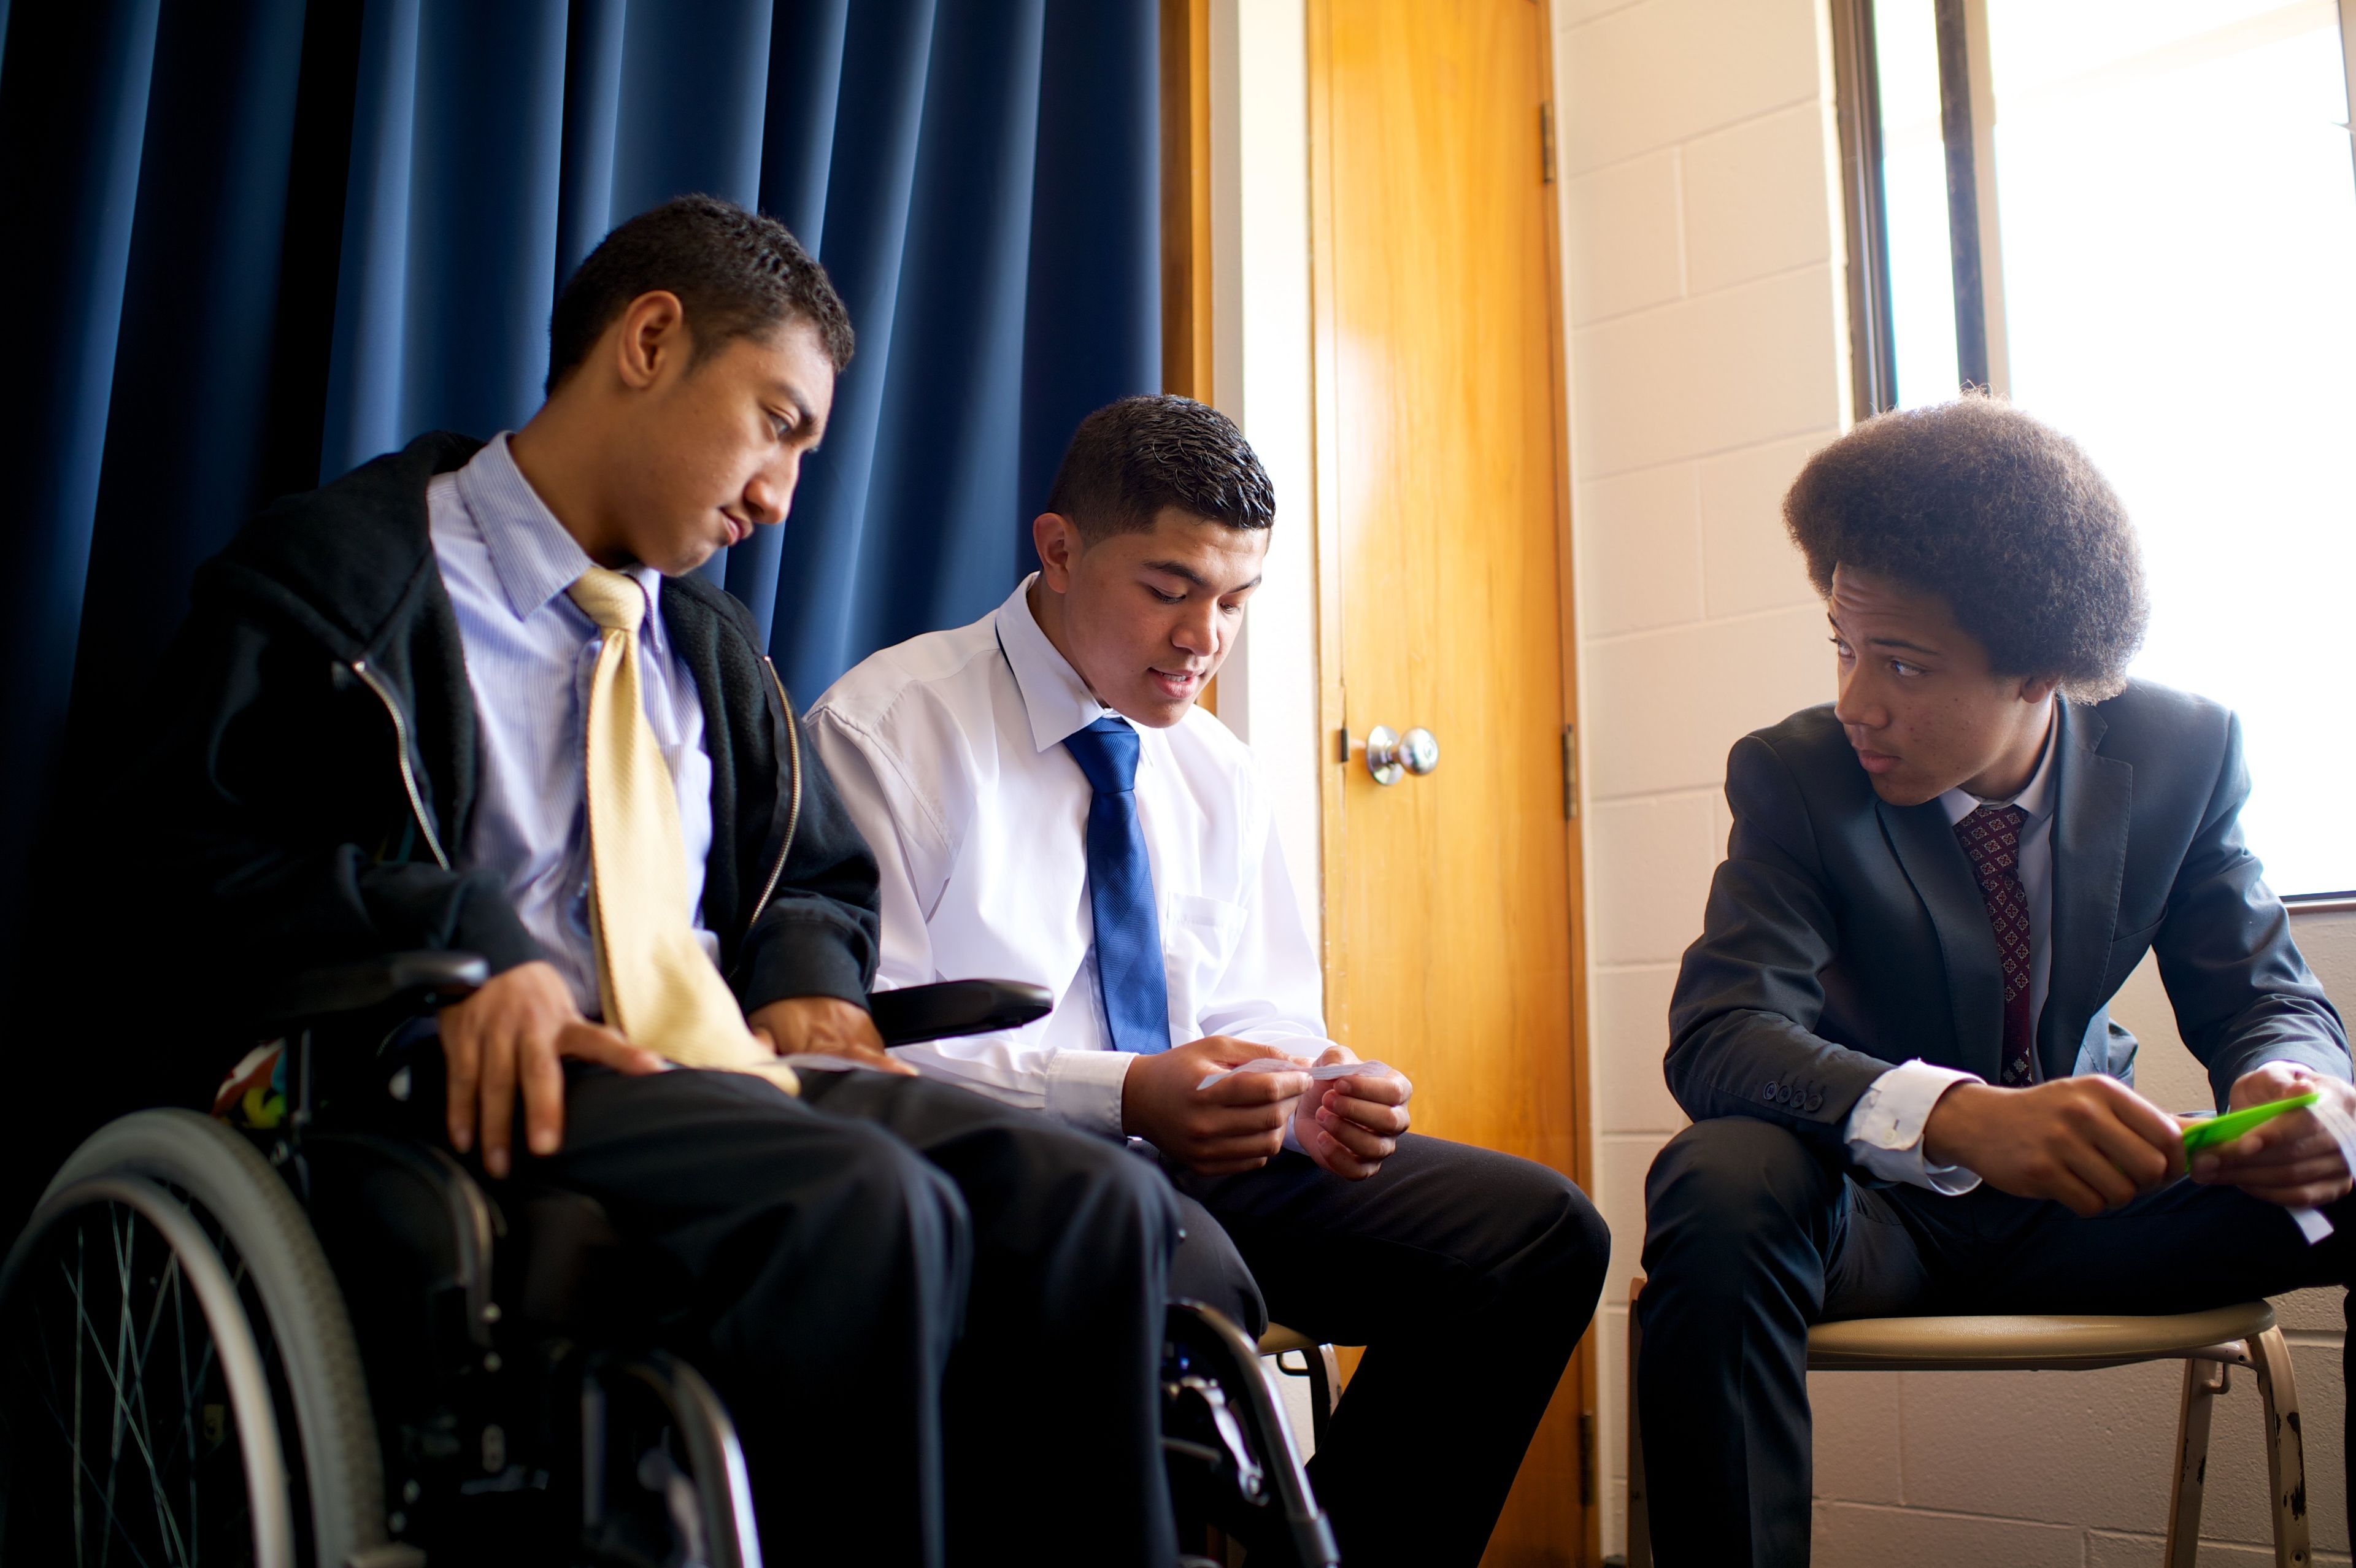 Three young men sit together in Sunday School.